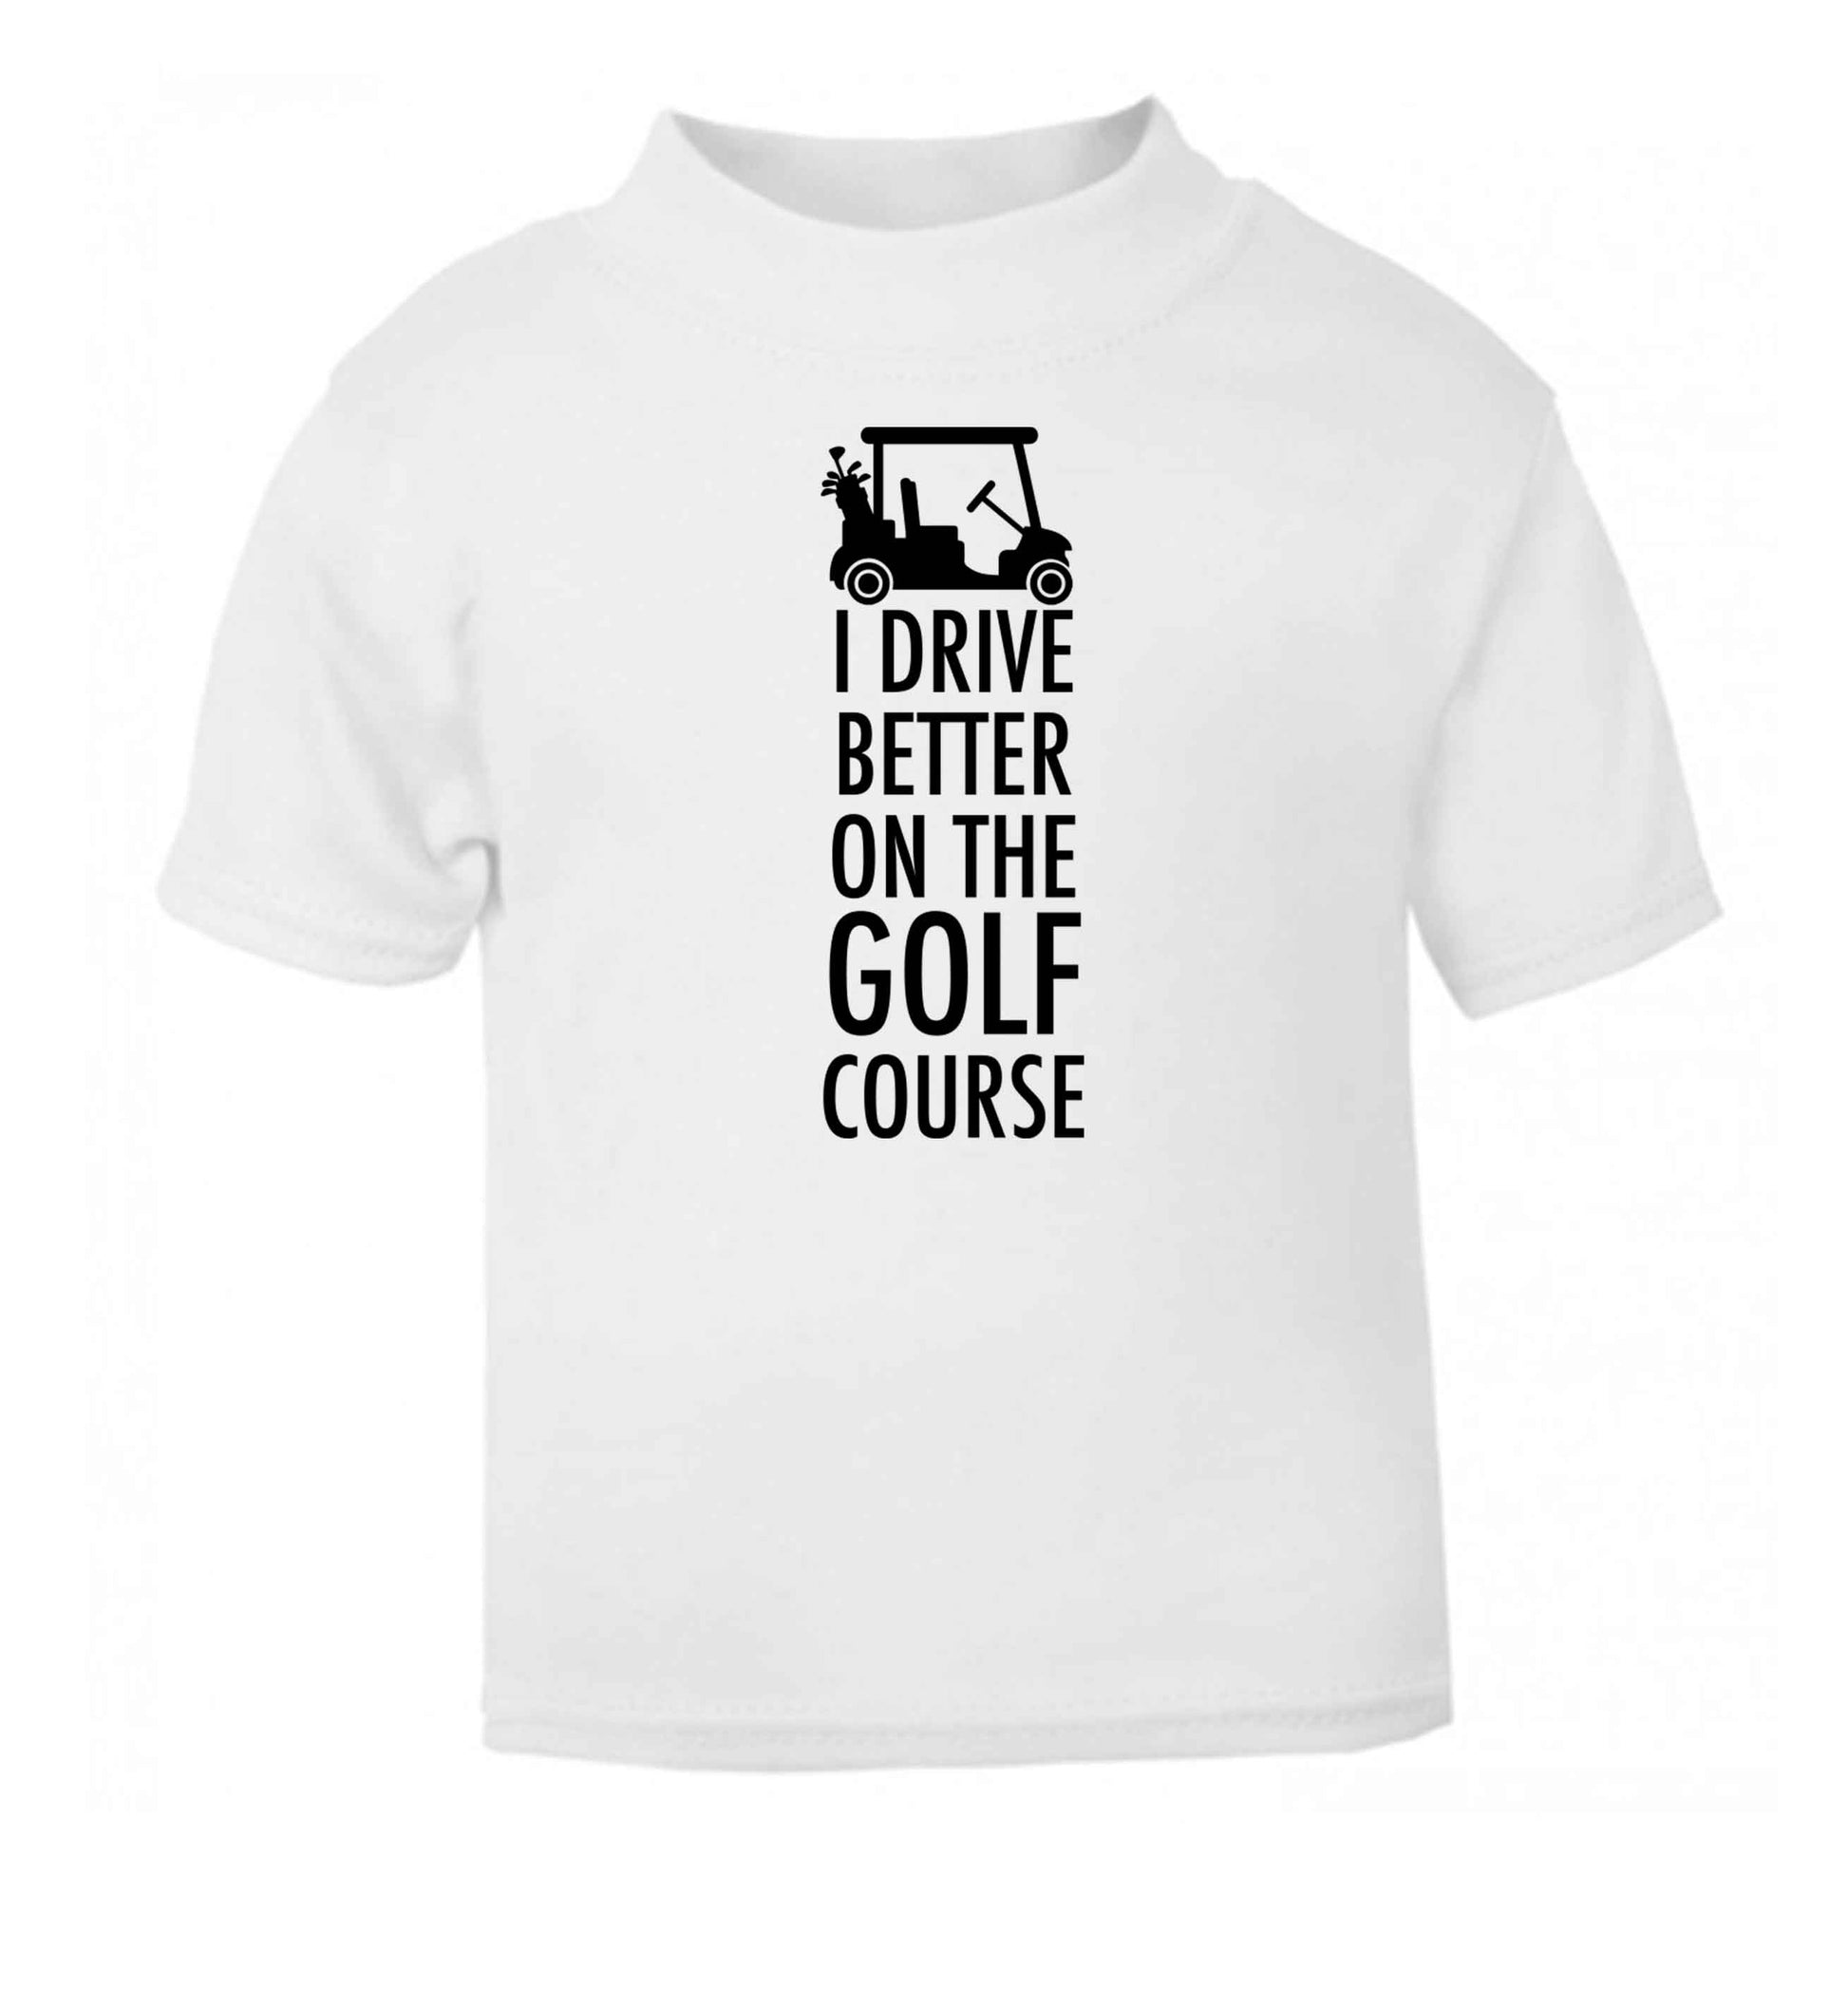 I drive better on the golf course white Baby Toddler Tshirt 2 Years